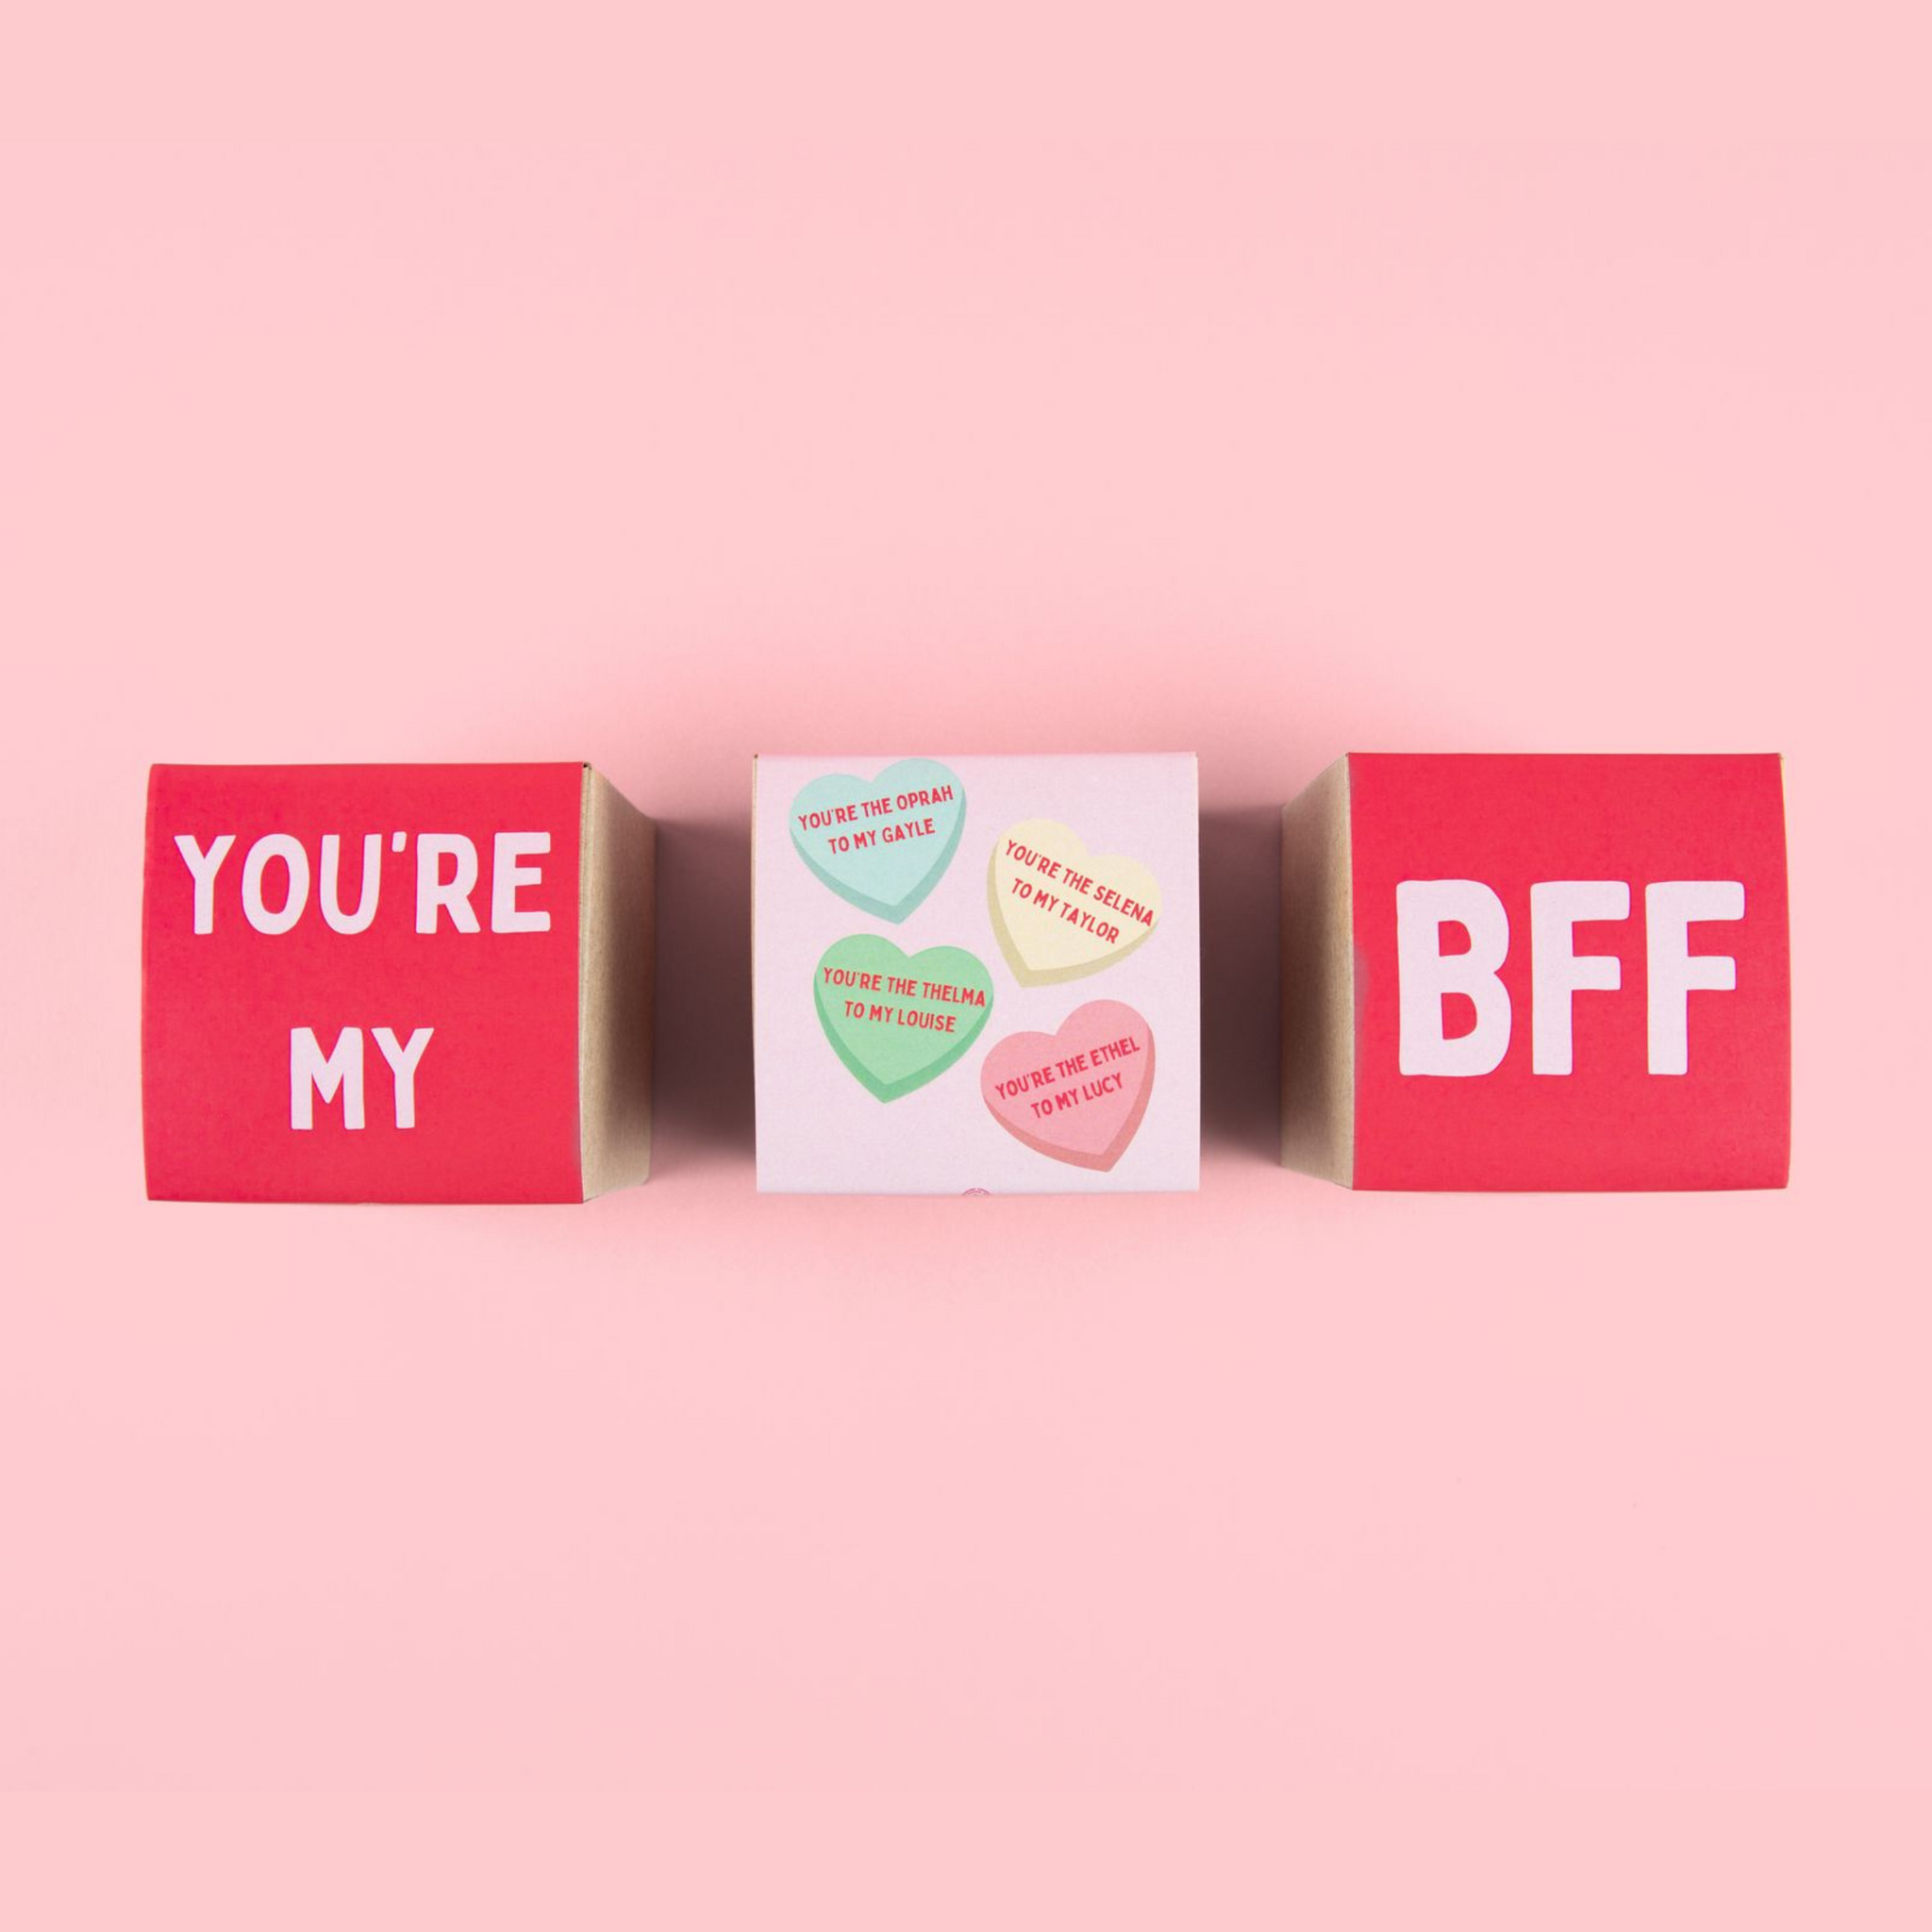 "You're My BFF" Trio ❤ GALENTINE'S SPECIAL